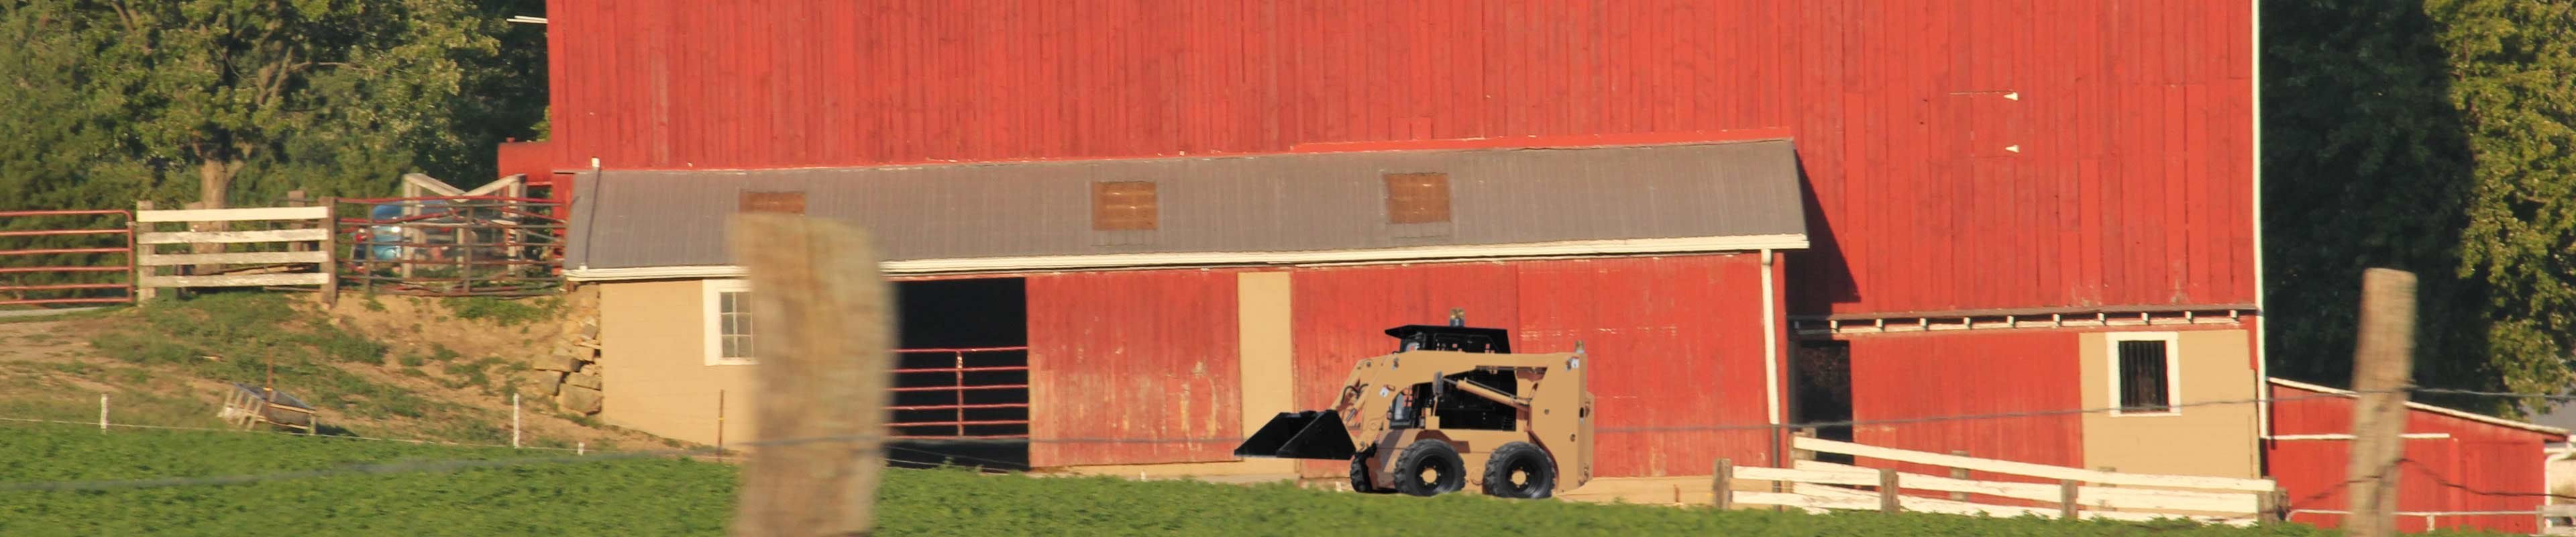 Image of a skid steer in front of a barn.